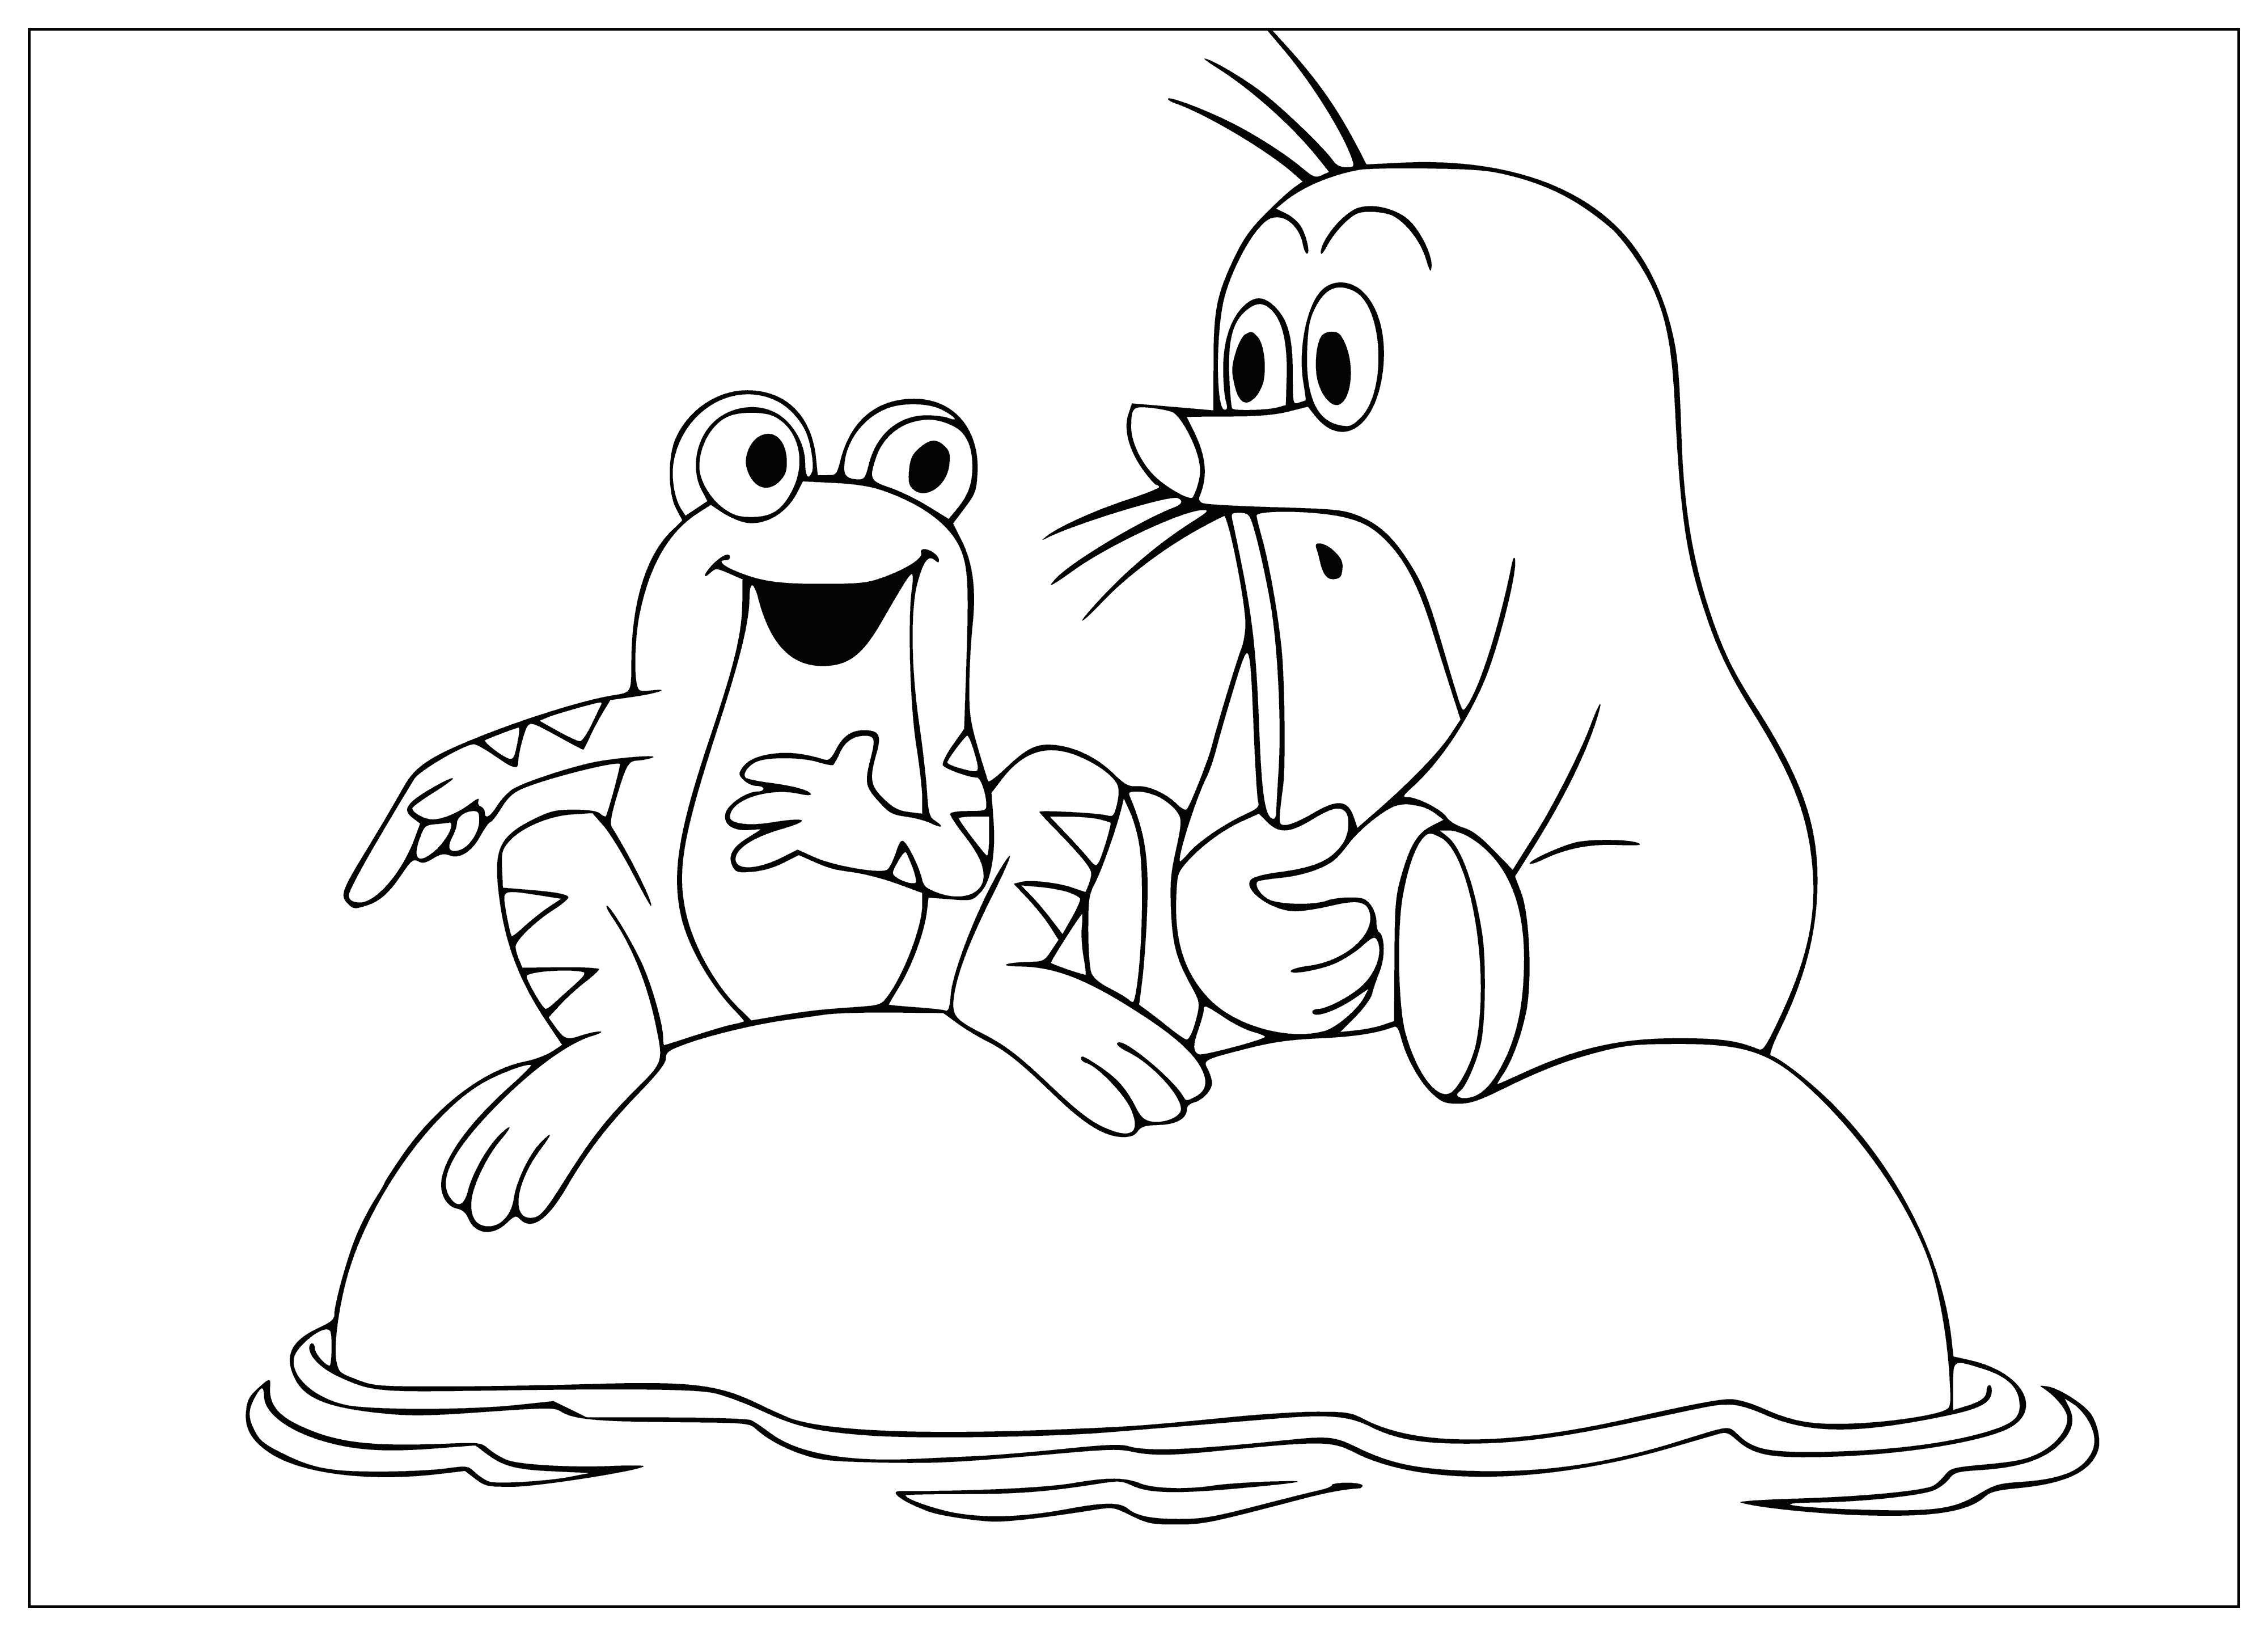 Frog and mole coloring page